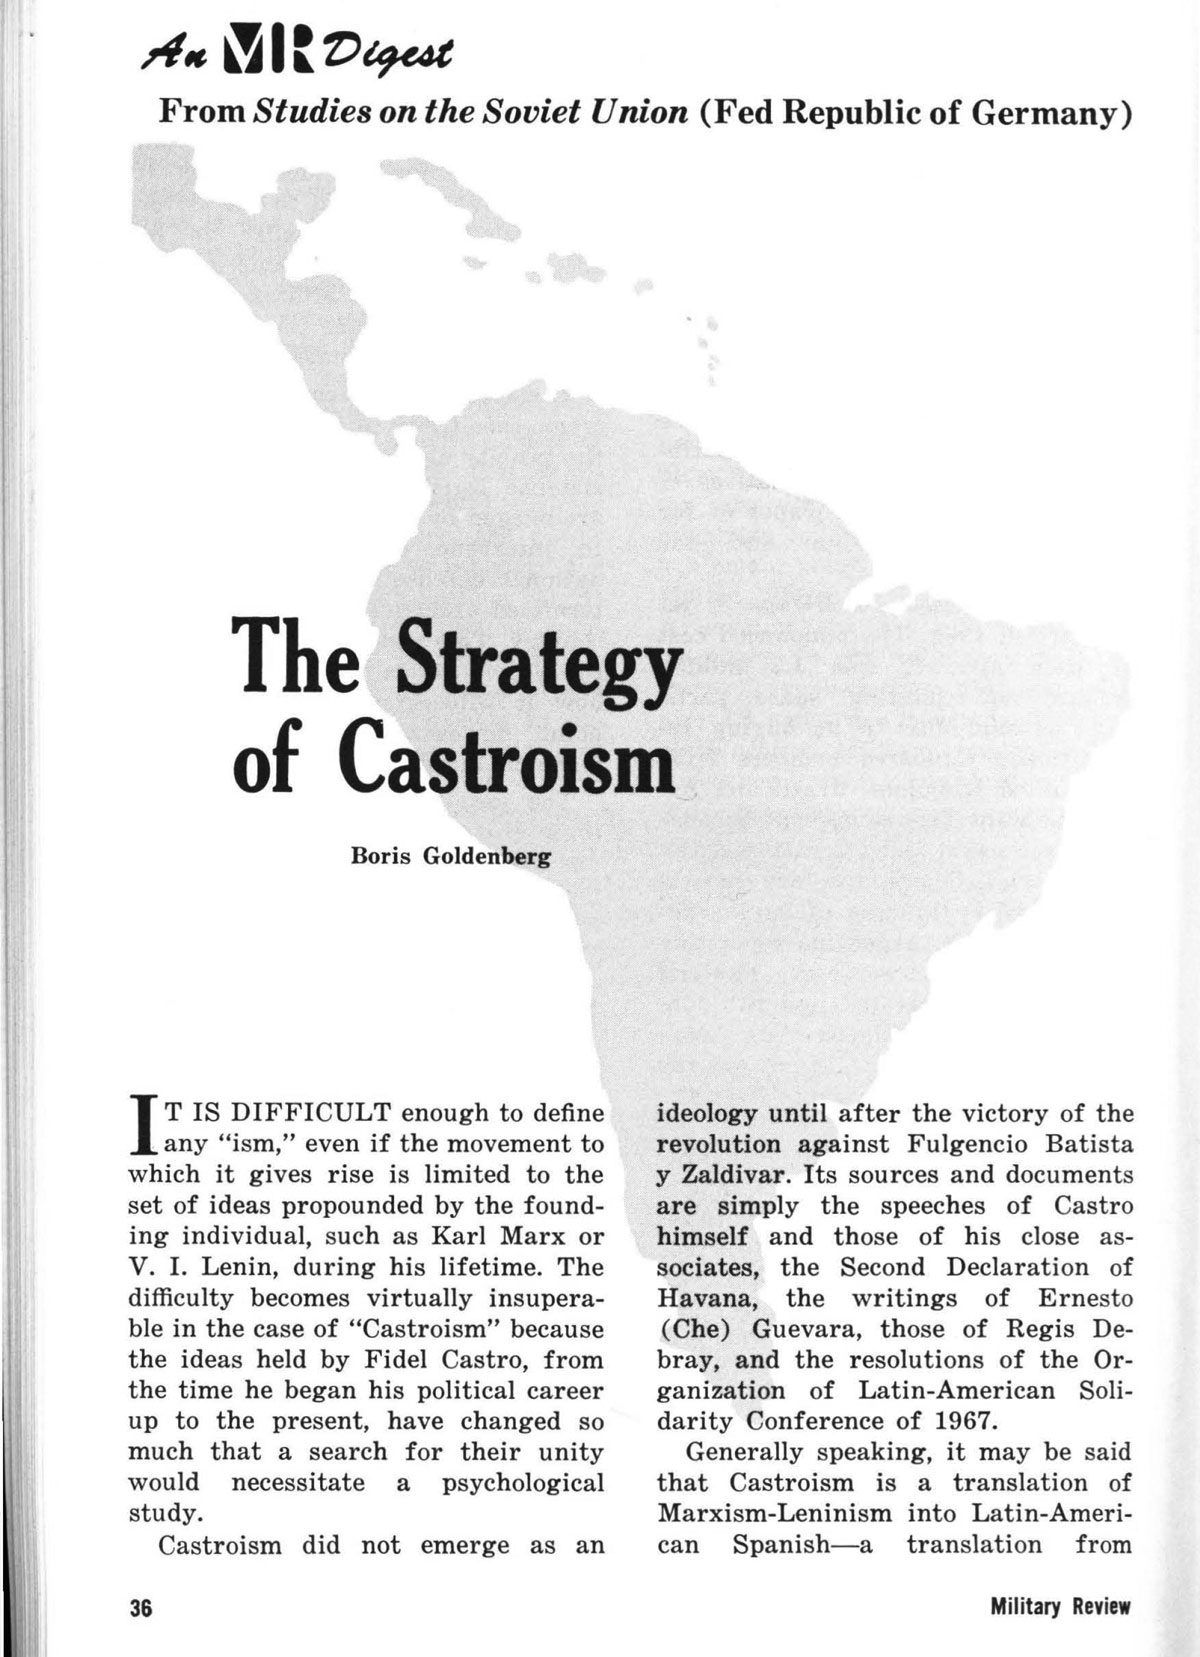 The Strategy of Castroism